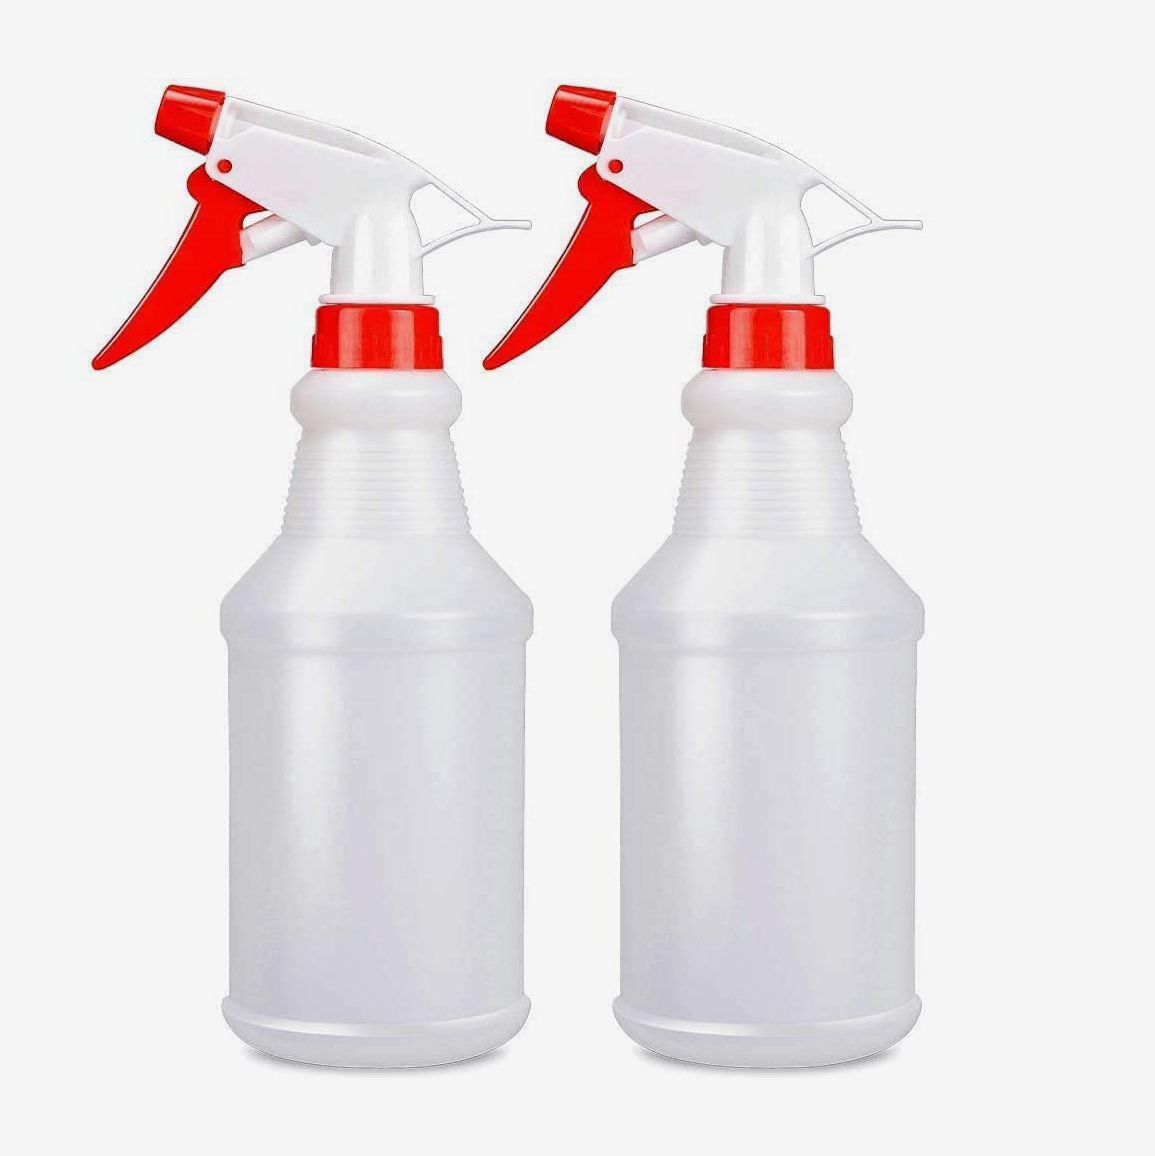 Watering Leak Proof Durable Sprayer for Cleaning Plastic and Large Size Empty Bottles Feeding and Washing Green+Blue 2 Pieces of Spray Bottles 